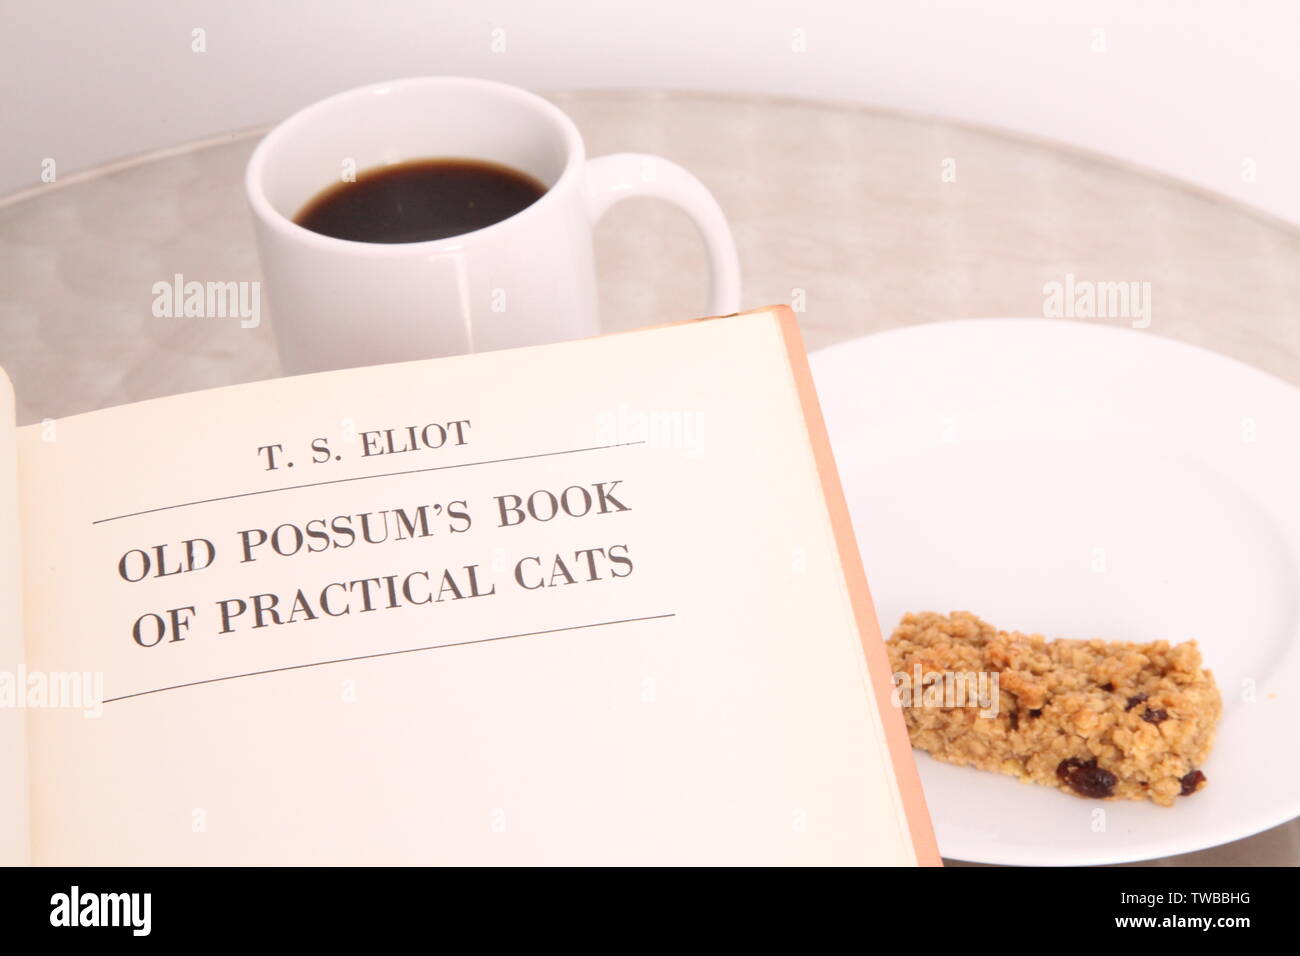 Old Possums Book of Practical Cats - A book of poems by T.S. Eliot, being read with a cup of coffee and snack on a silver bistro table Stock Photo